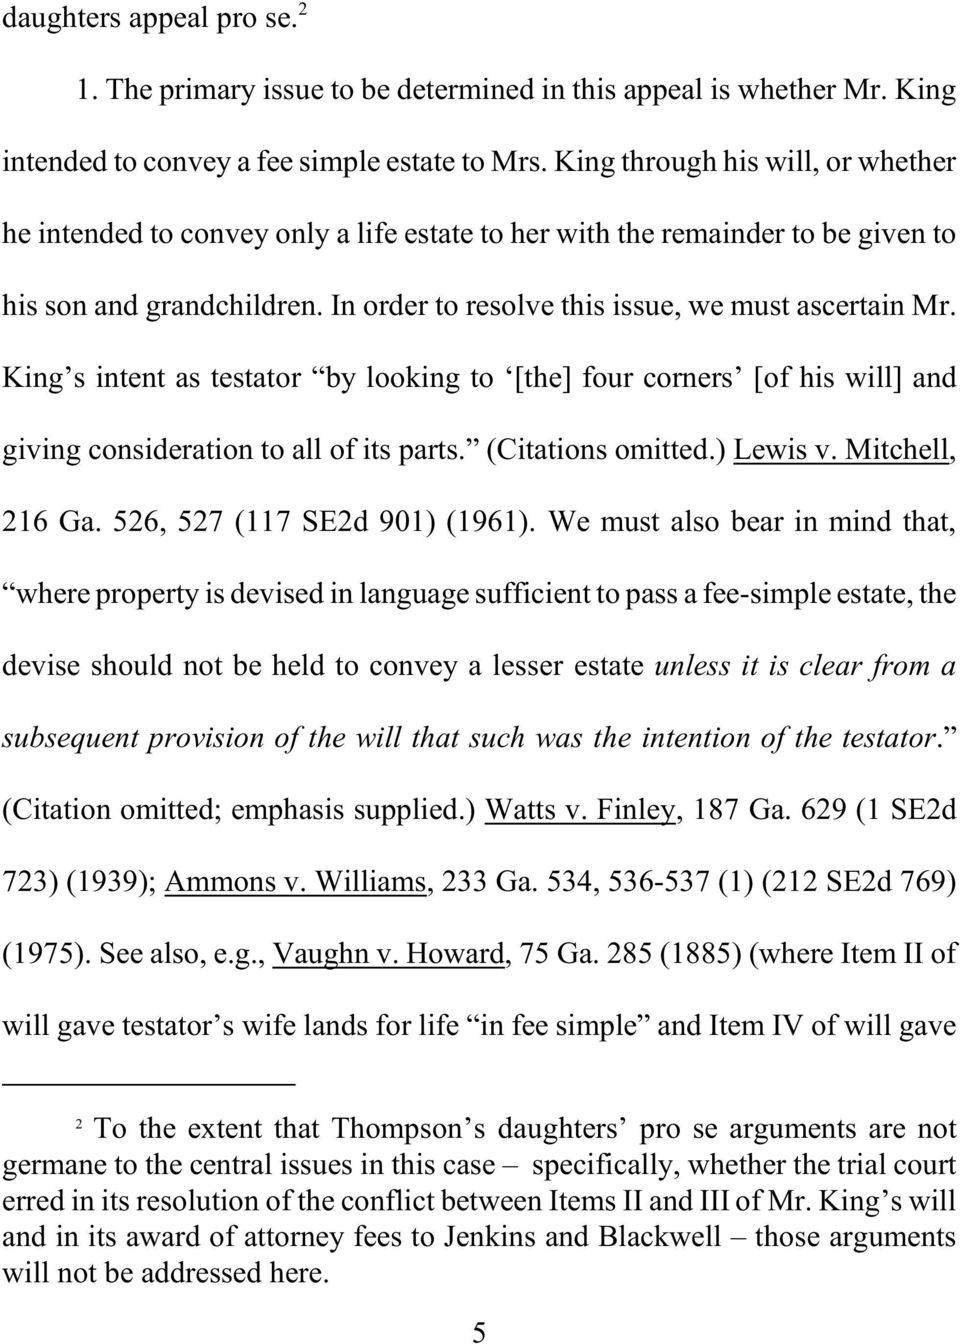 King s intent as testator by looking to [the] four corners [of his will] and giving consideration to all of its parts. (Citations omitted.) Lewis v. Mitchell, 216 Ga. 526, 527 (117 SE2d 901) (1961).